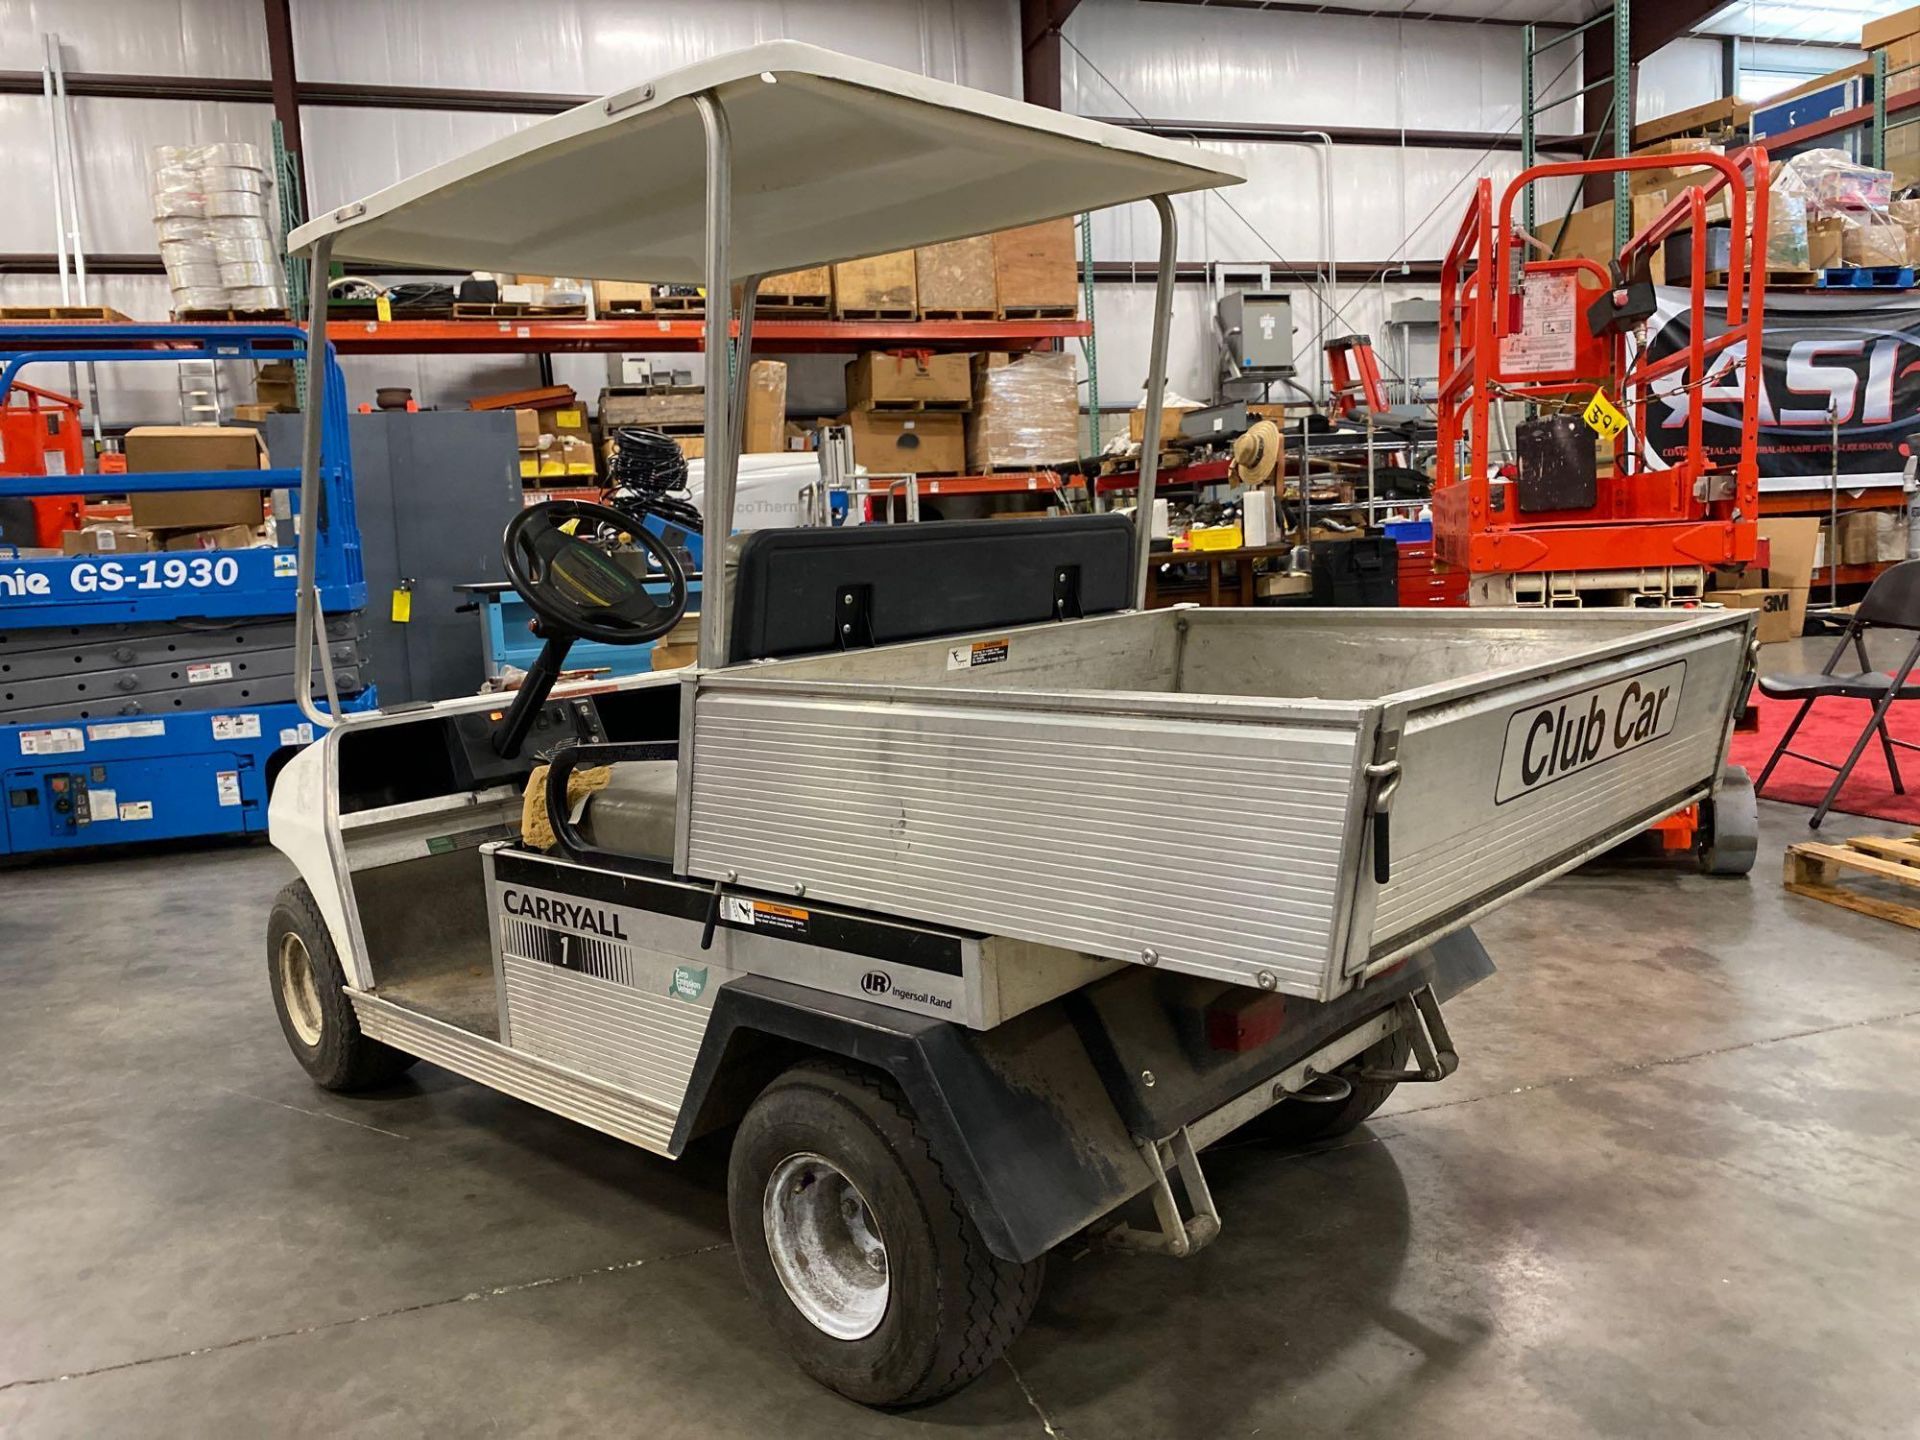 CLUB CAR CARRYALL ELECTRIC UTILITY CART WITH BED, RUNS AND OPERATES - Image 3 of 7